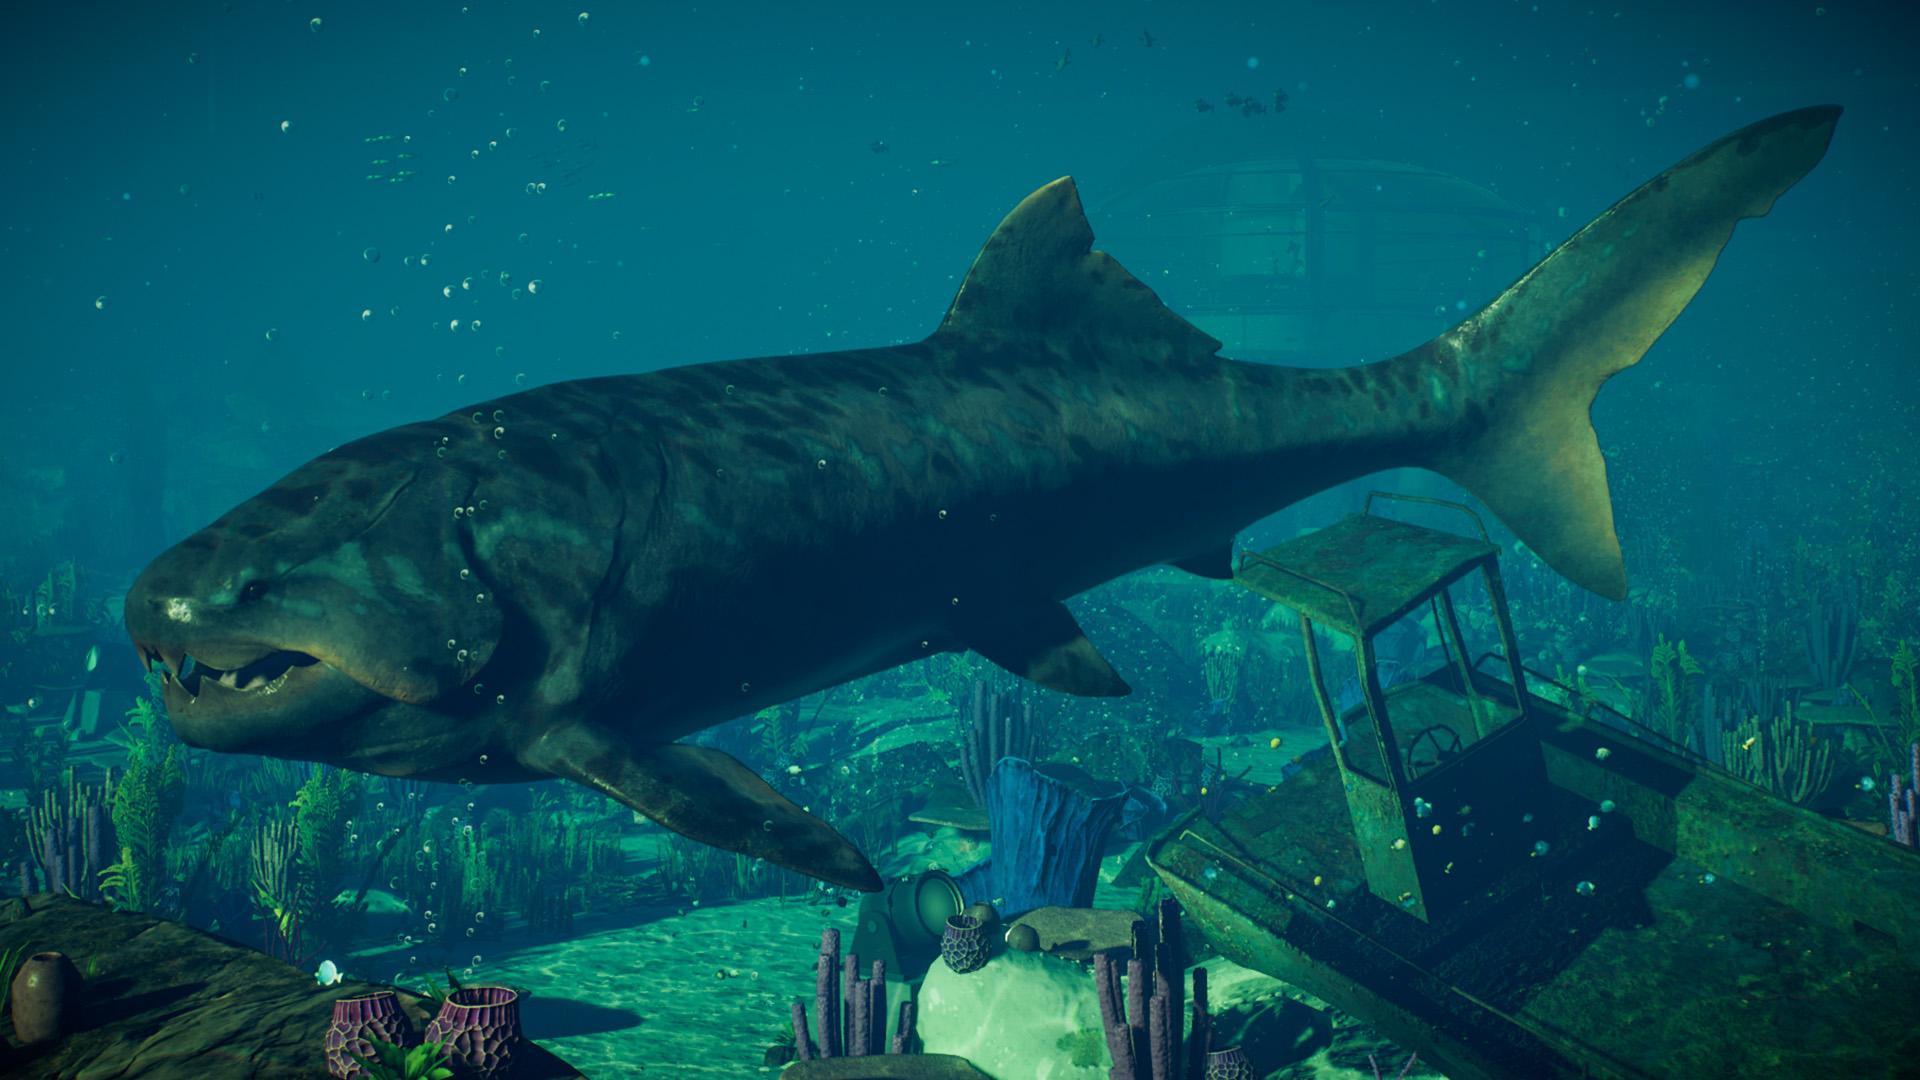 Expand your underwater exhibits with Jurassic World Evolution 2: Prehistoric Marine Species Pack